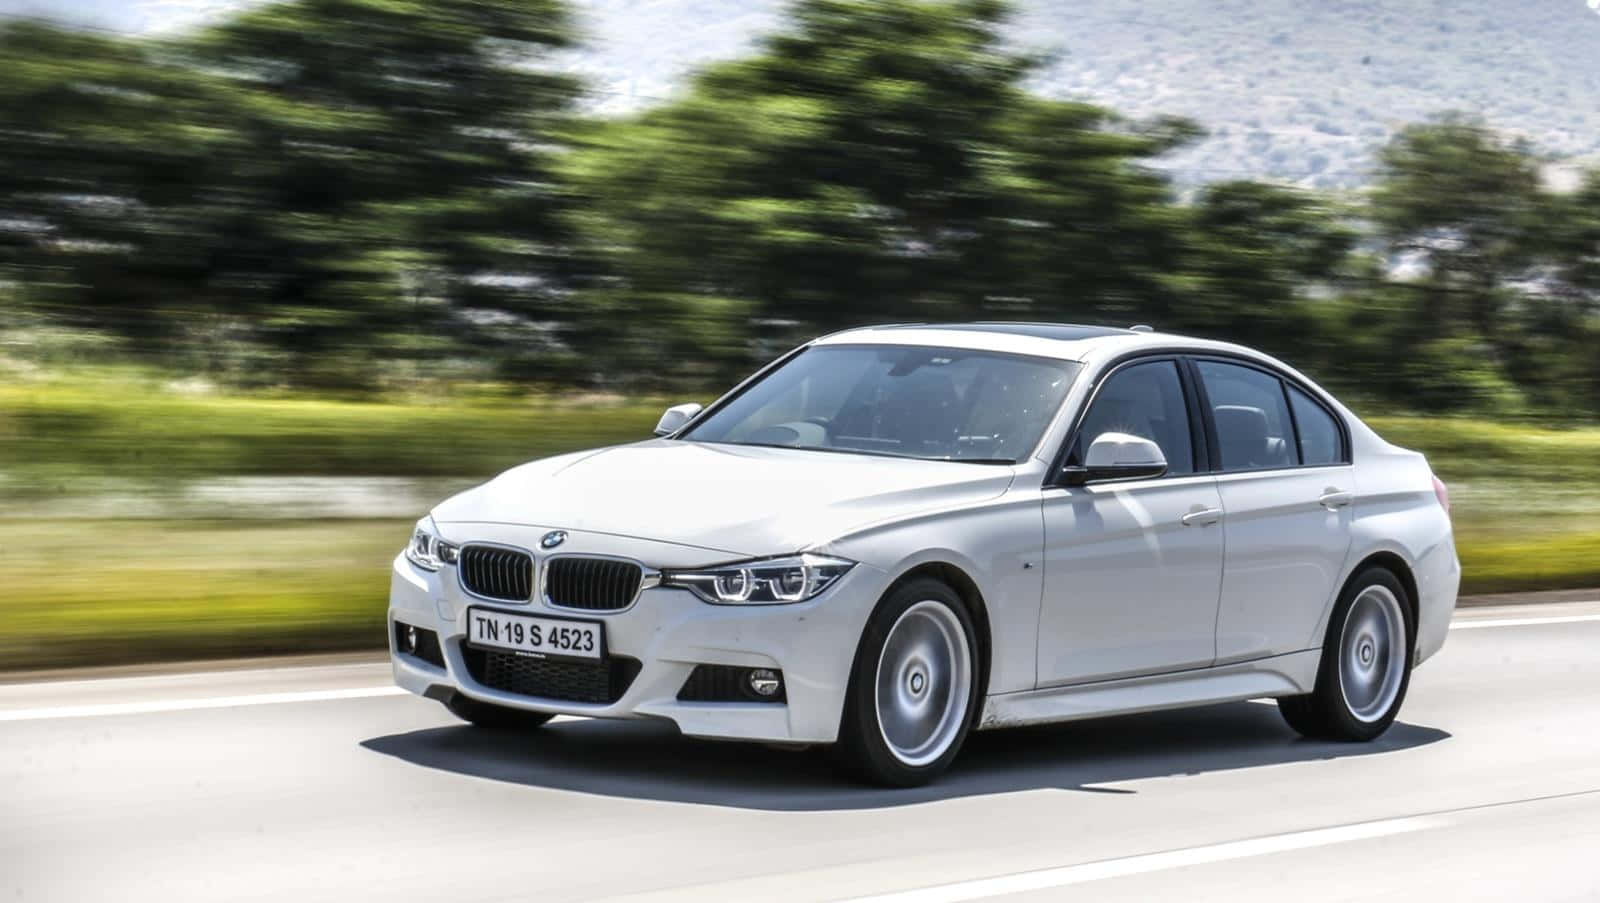 Take your motoring experience to the next level with BMW M Series